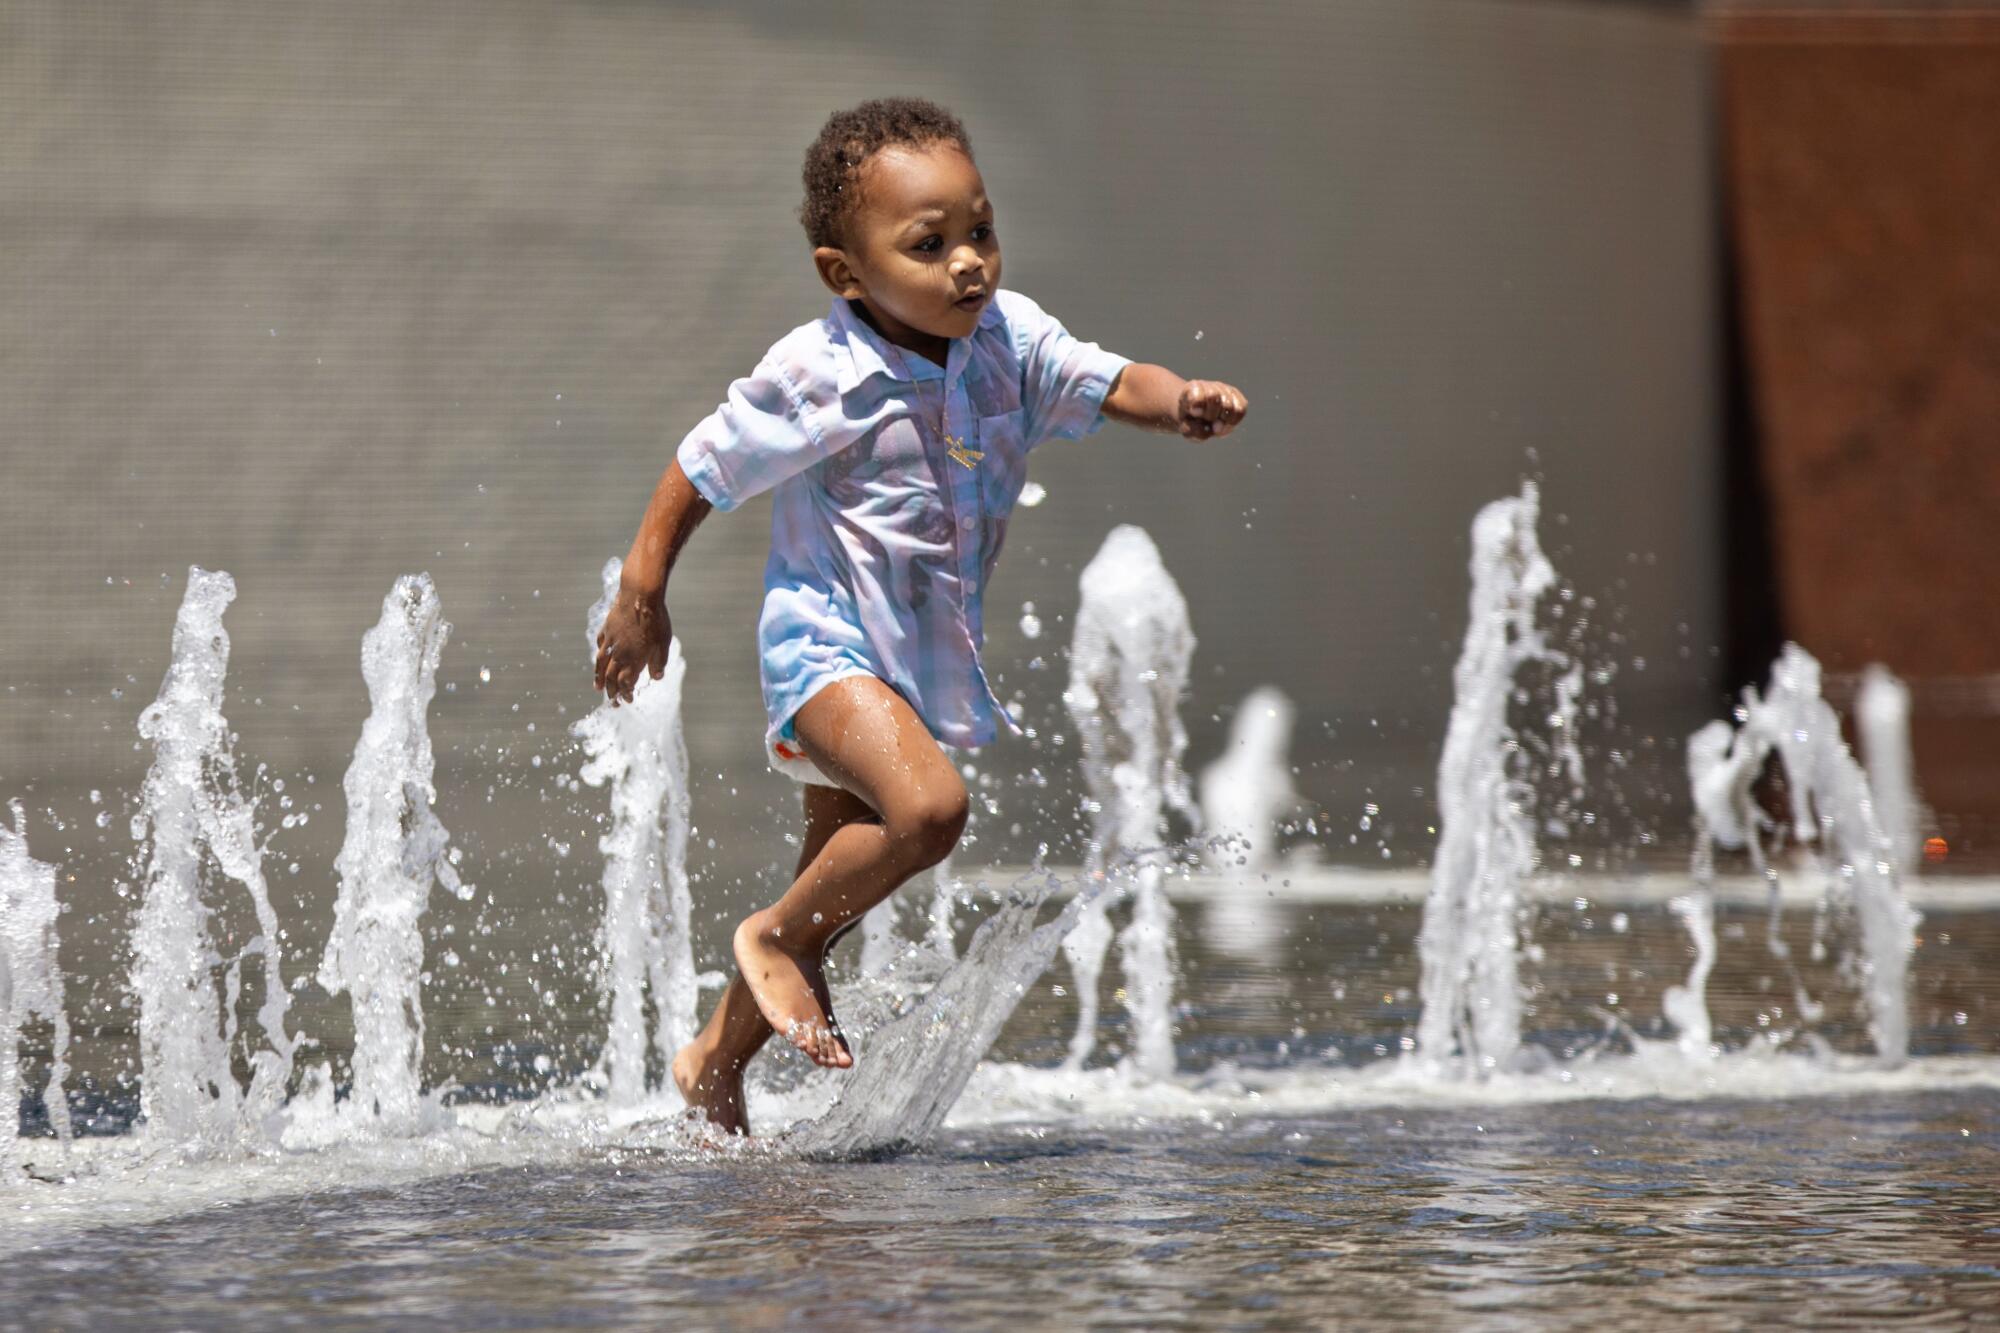 A youngster runs among fountain jets.